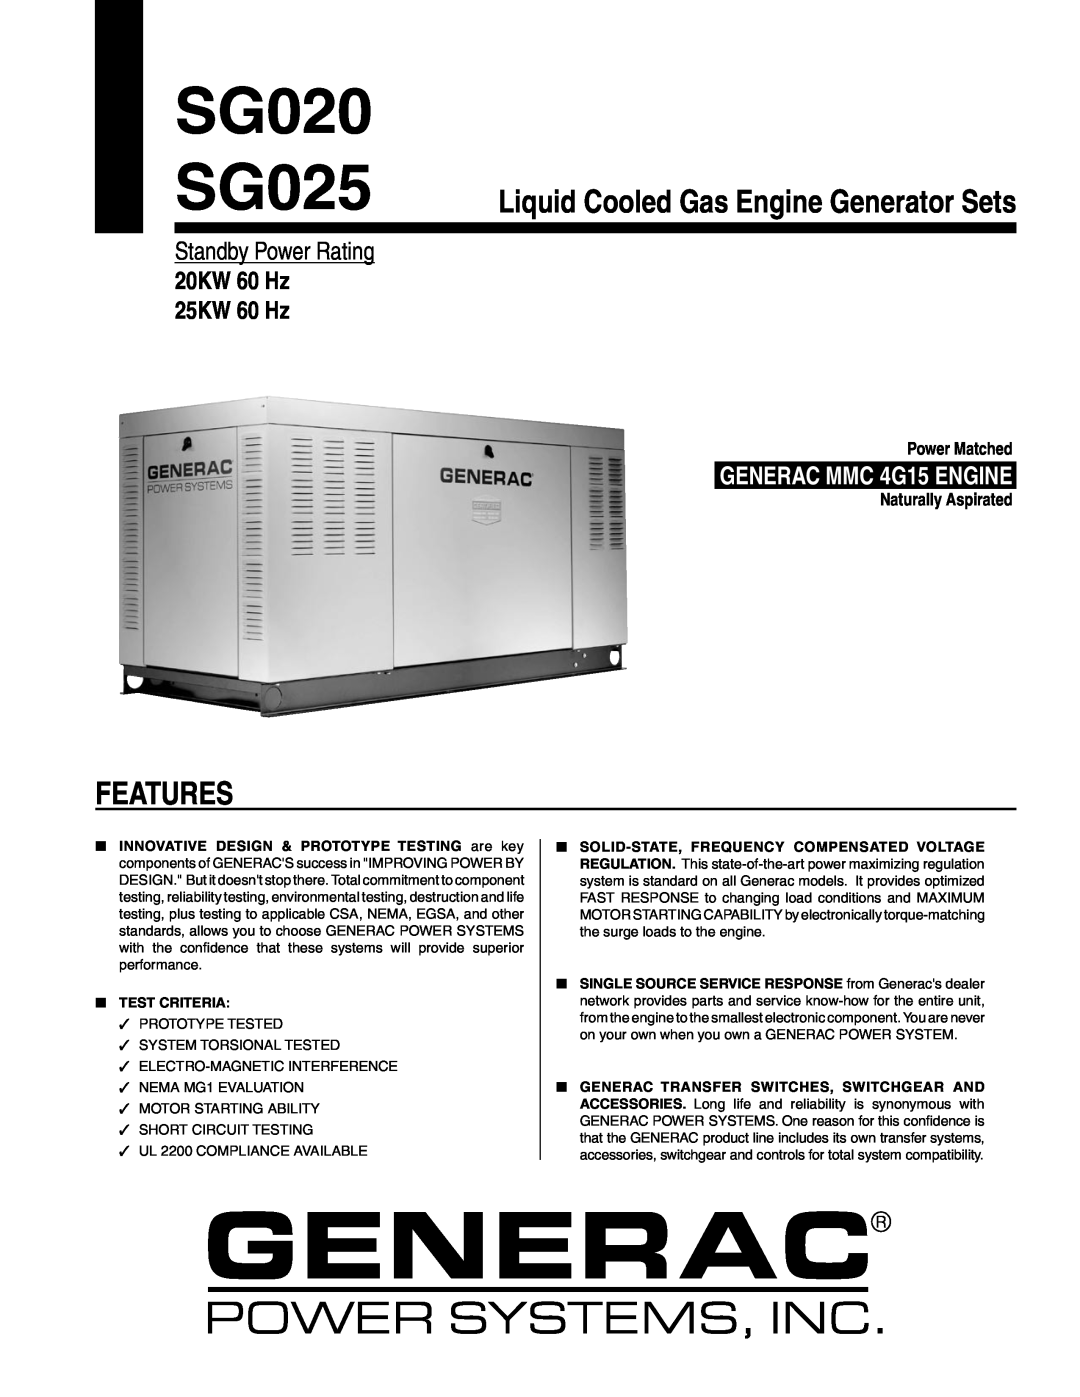 Generac Power Systems SG020 manual Features, Liquid Cooled Gas Engine Generator Sets, Standby Power Rating, 20KW 60 Hz 